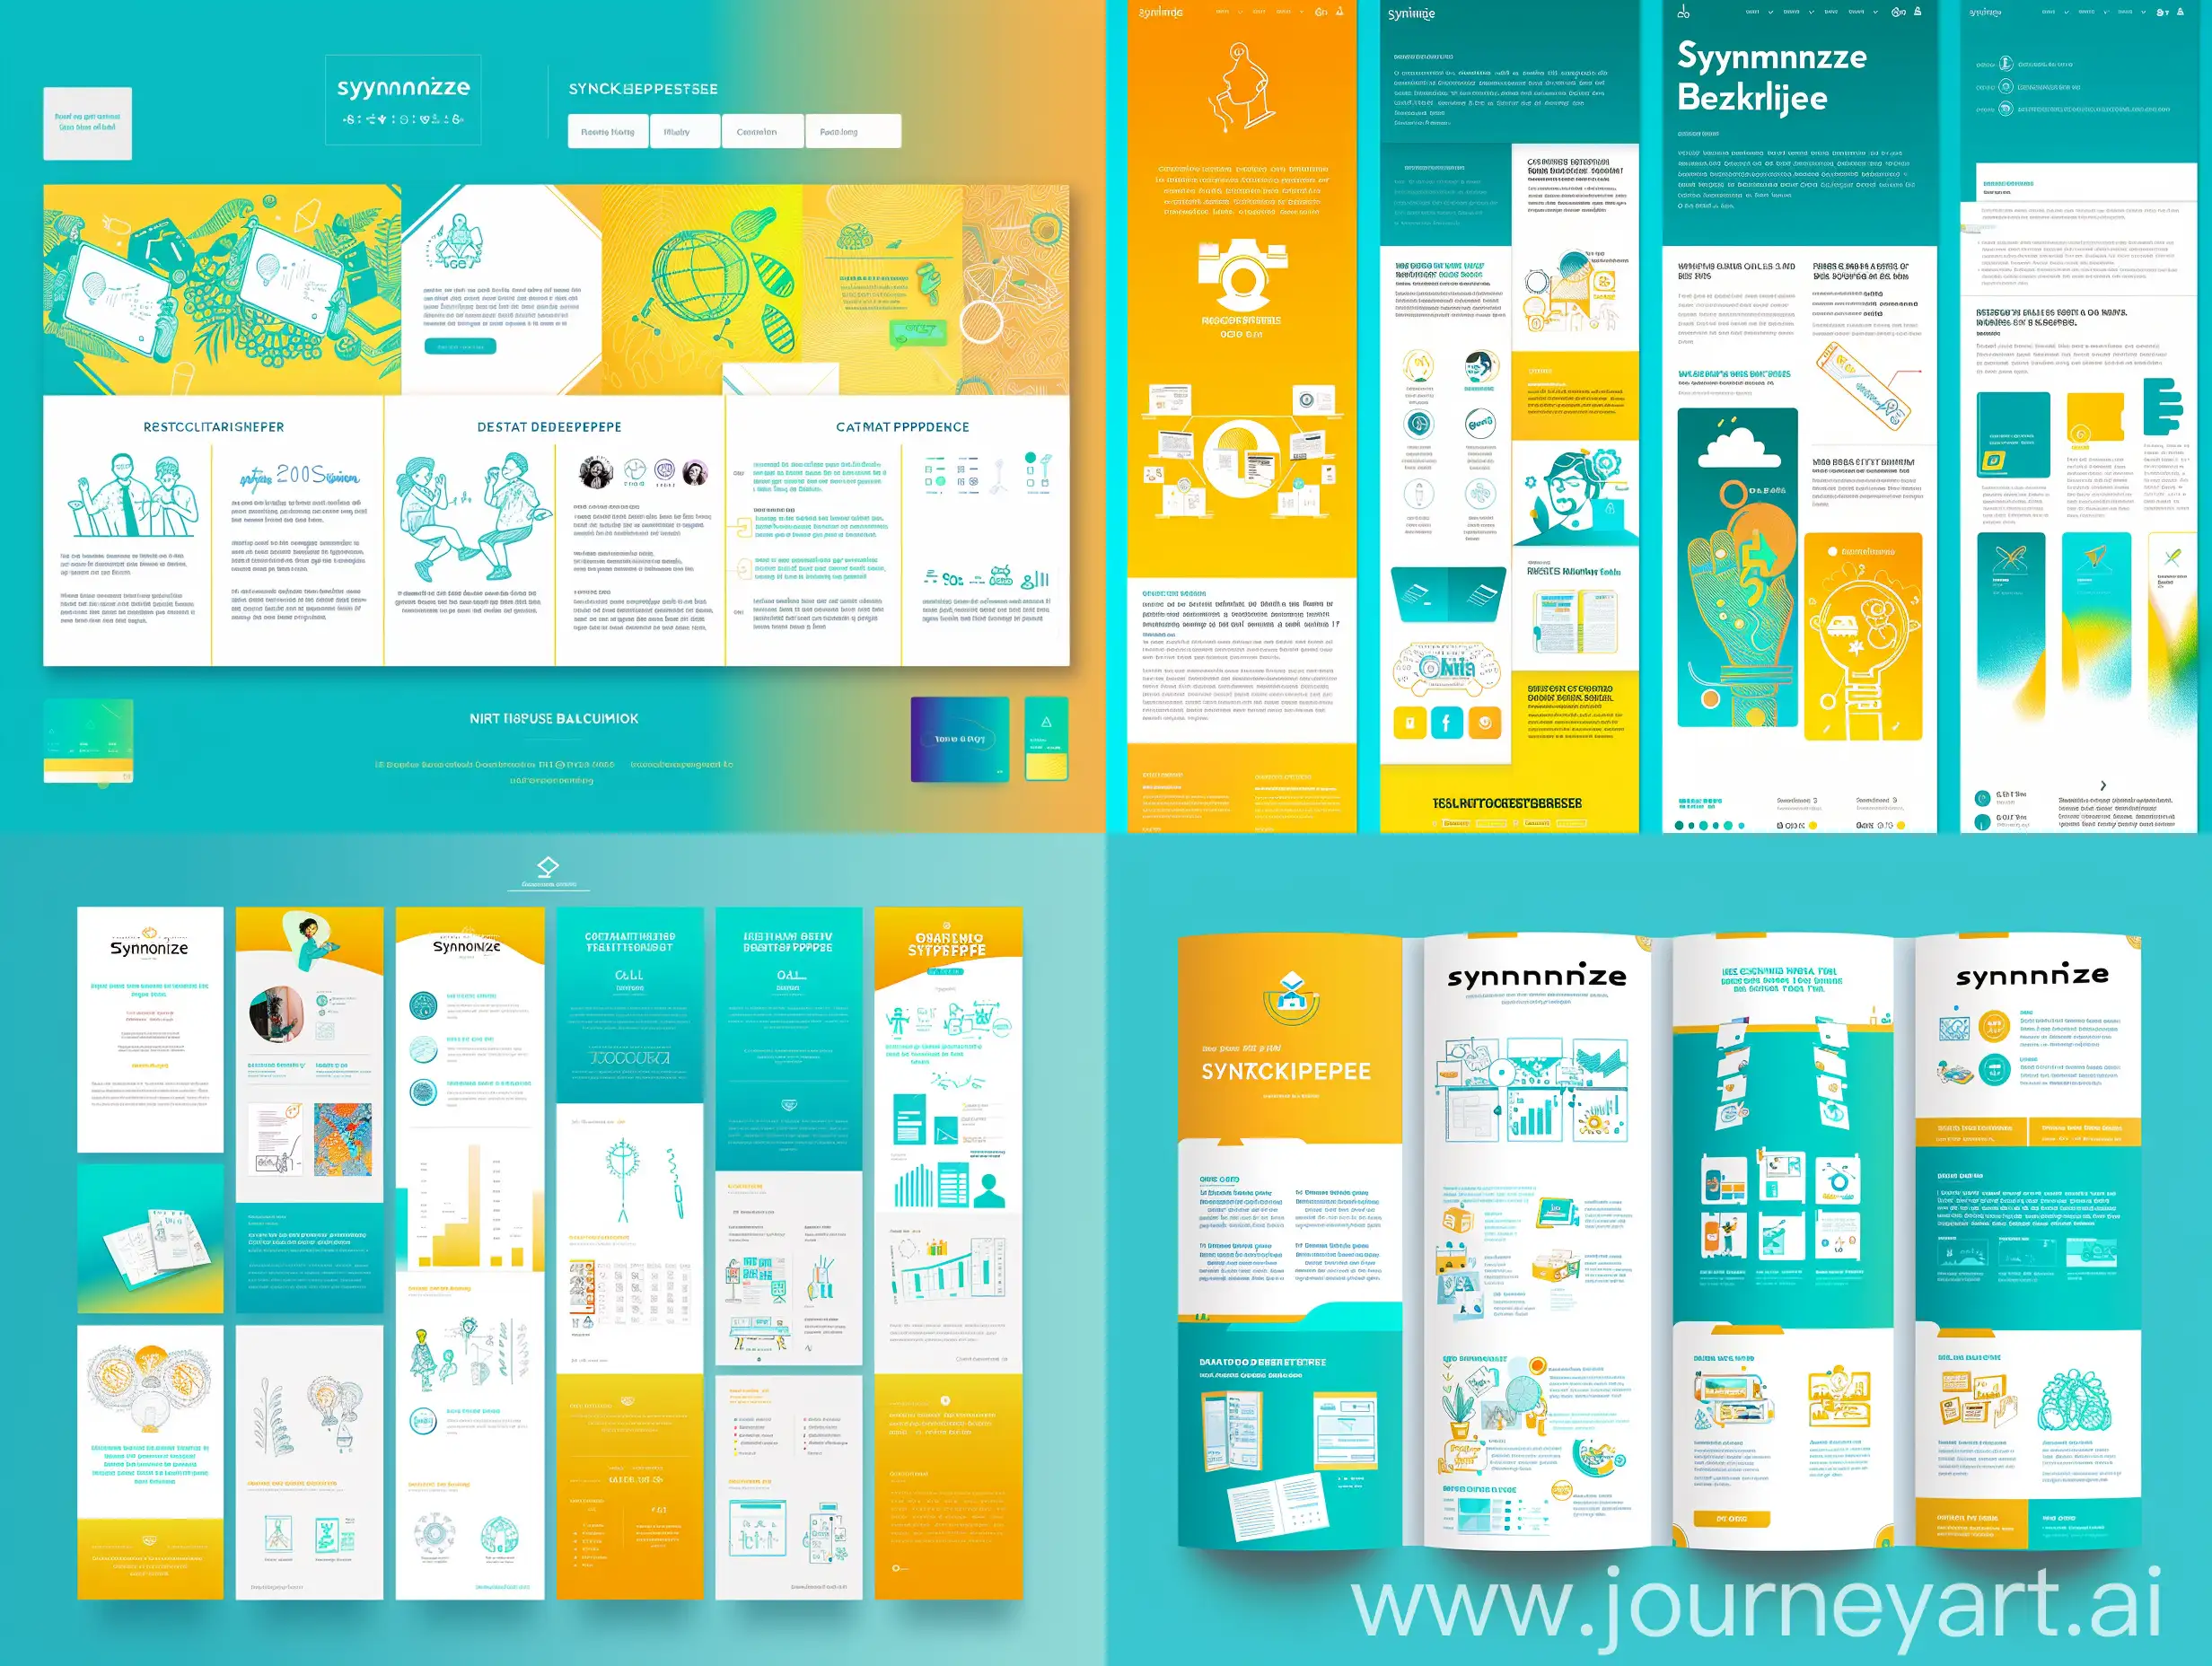 "Design a long-scroll Behance post template for 'Synkronize,' featuring a bright cyan (#00BFFF) and cheerful yellow (#FFD700) gradient color scheme with white (#FFFFFF) accents. The template includes a header section with the project logo and title, an issue statement section with text and icons, a research findings section with infographics, a concept development section with sketches and mood boards, a design process section with step-by-step visuals, a final design section with high-quality images, and a conclusion section with a summary and call to action. Typography is bold and playful for headers, regular for body text, and italicized for captions. Icons are simple and flat, with vibrant colors and subtle gradients for depth."layout design style